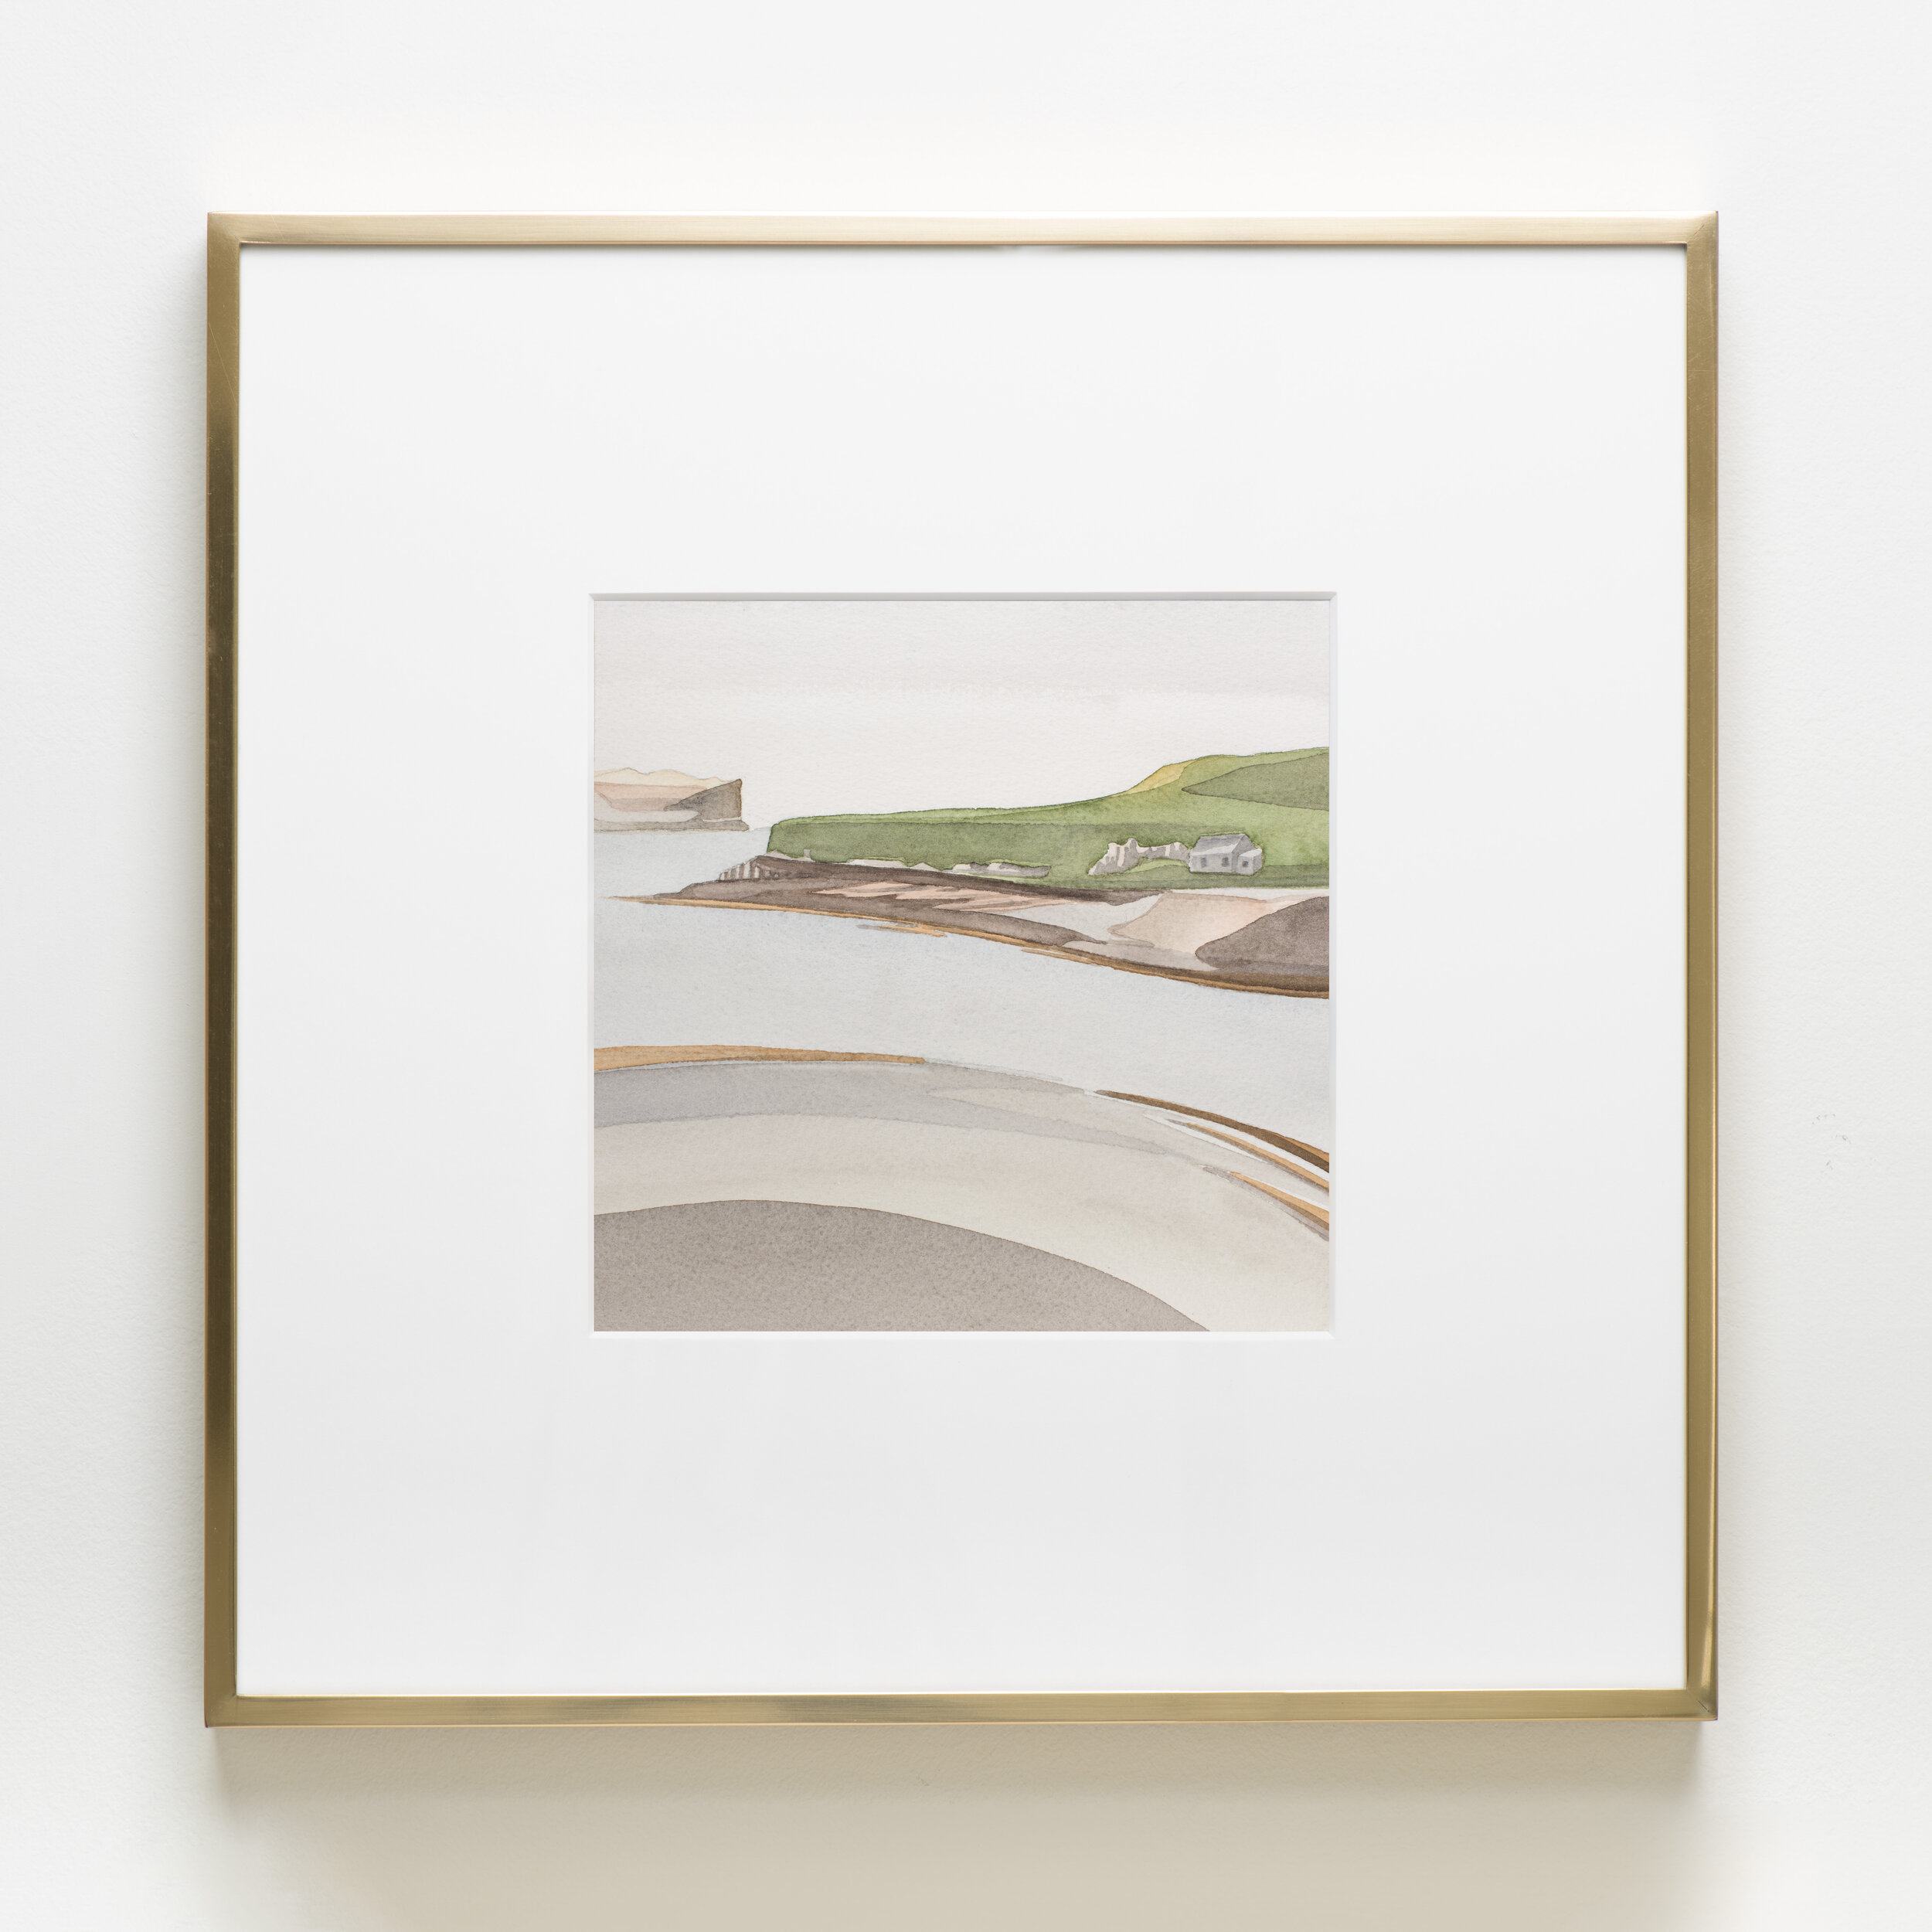   Staffin Island, Isle of Skye , 2019 Watercolor on paper 16 1/4 x 16 1/4 x 1 1/4 inches (framed) 